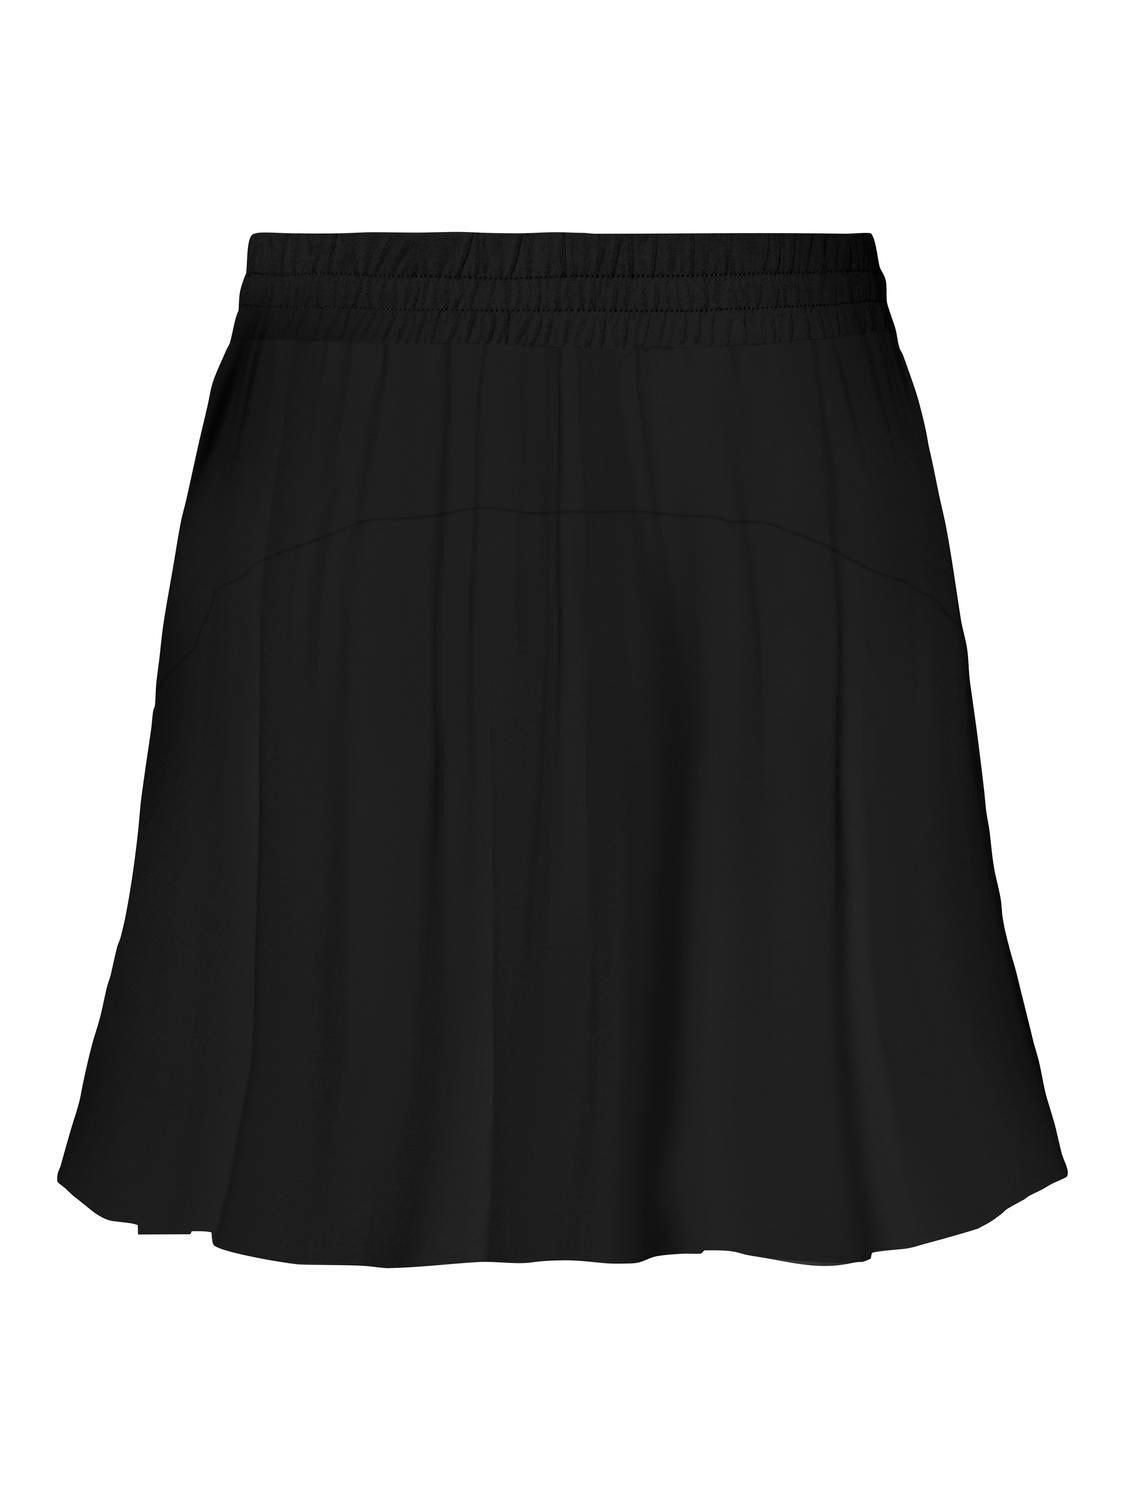 ONLY Mini skirt with mid waist -Black - 15322967